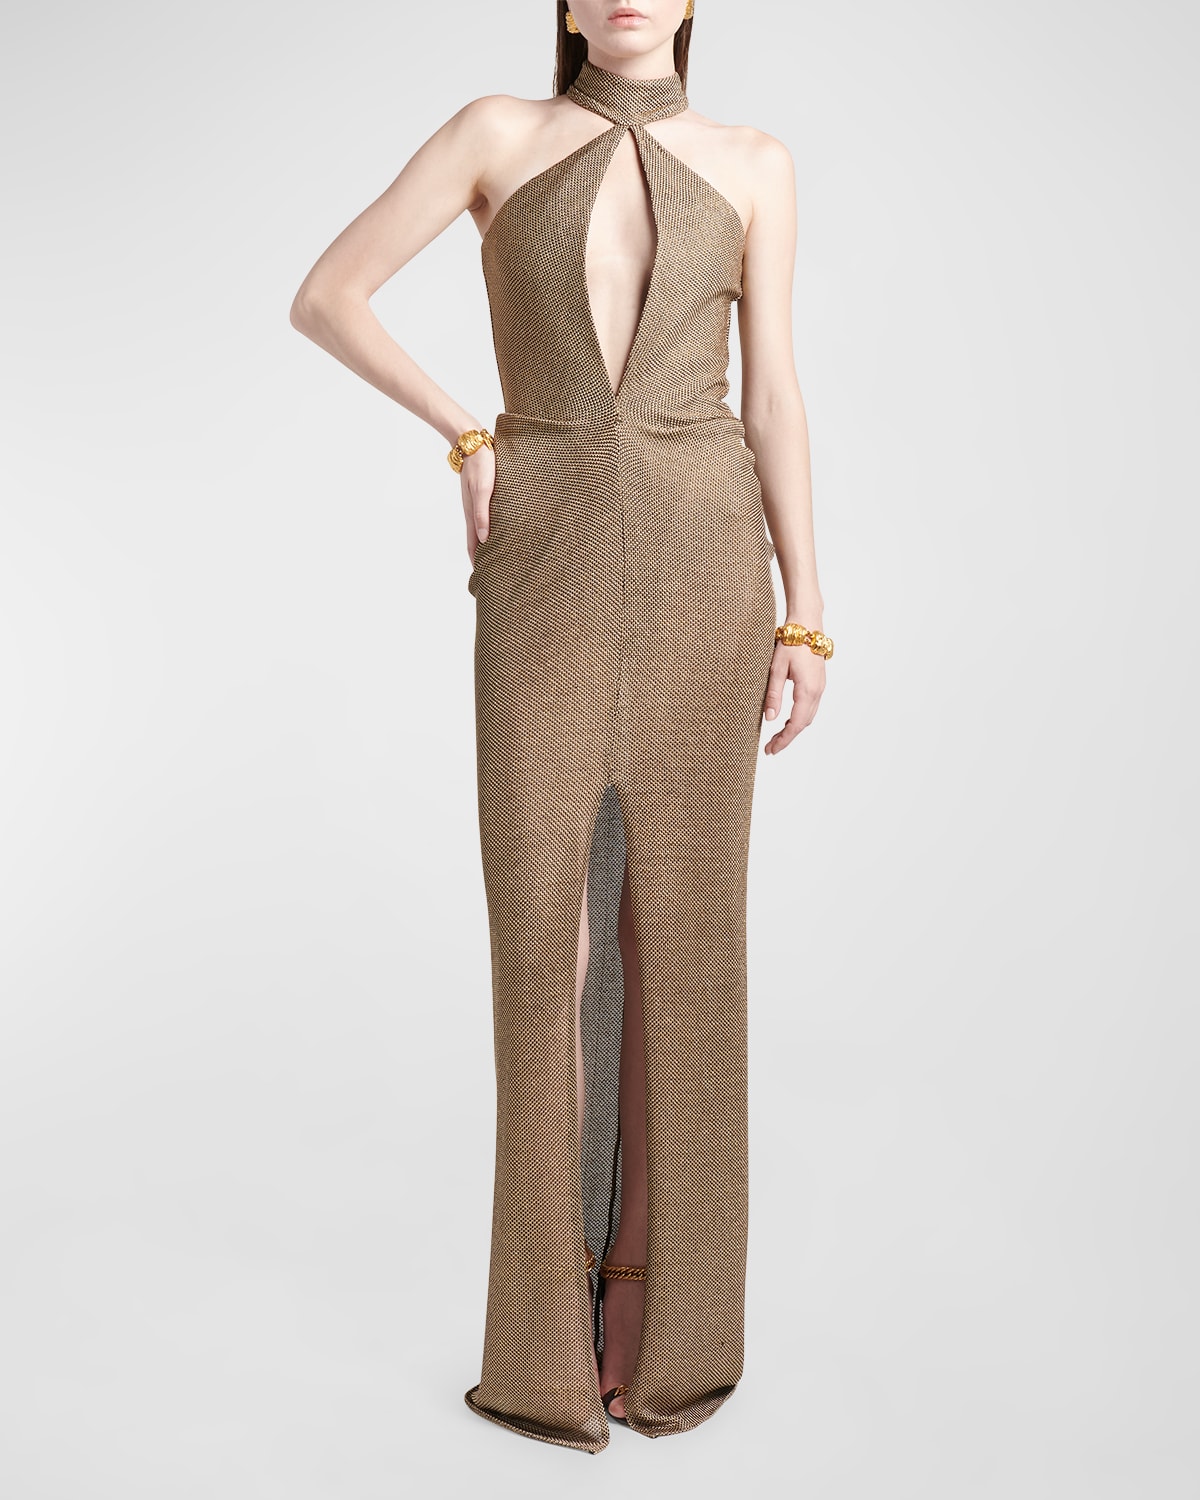 Tom Ford Cutout Mock-neck Halter Metallic Honeycomb Evening Gown In Gold